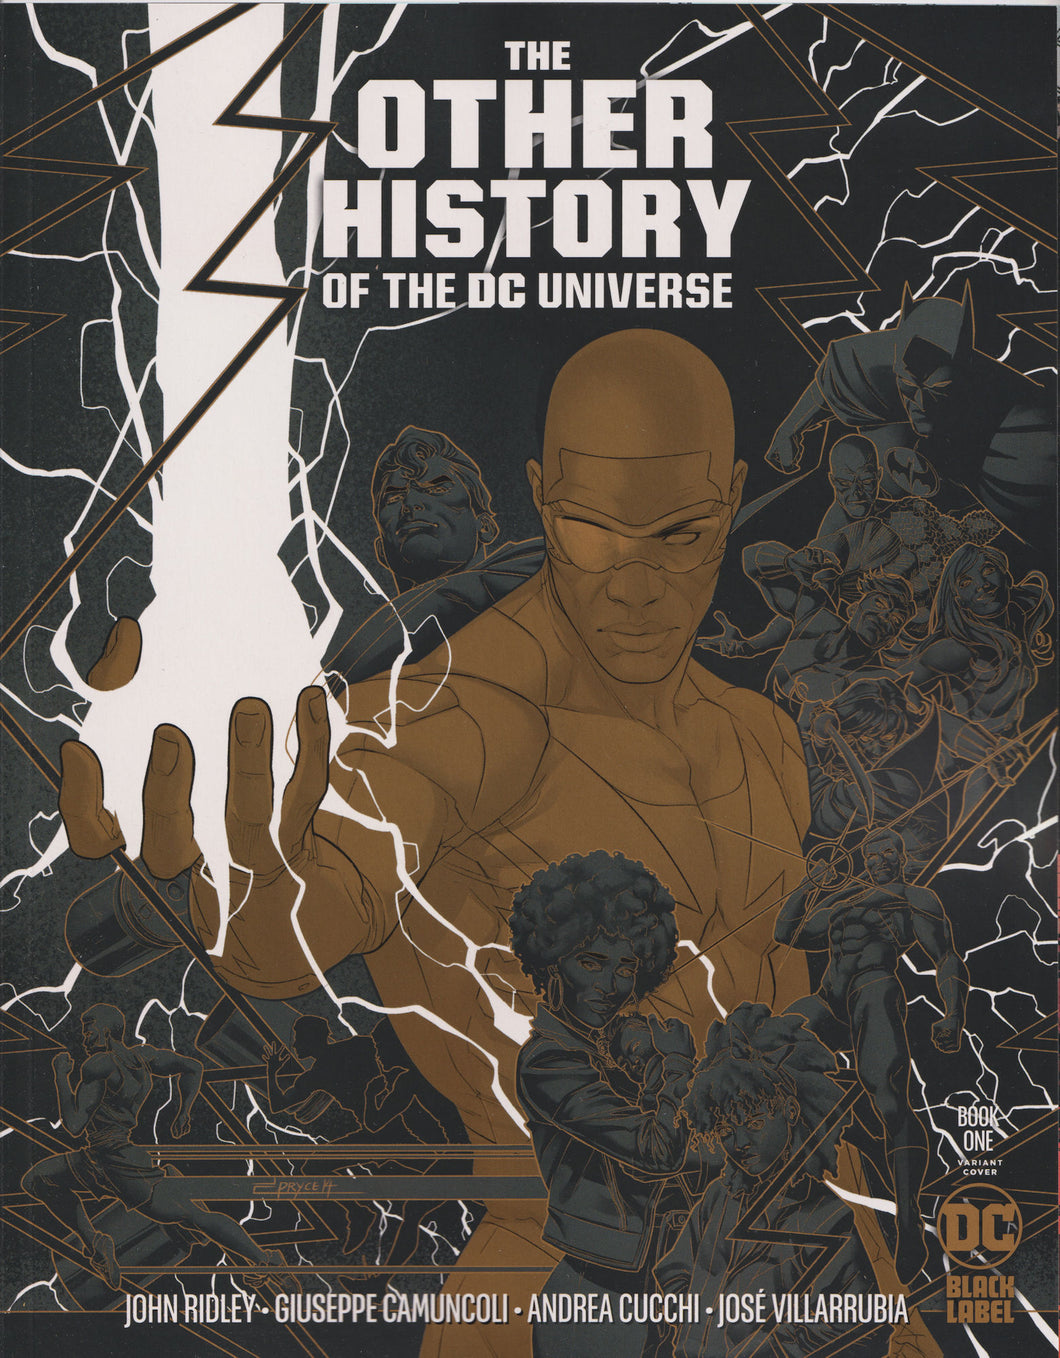 THE OTHER HISTORY OF THE DC UNIVERSE #1 (JAMAL CAMPBELL 1:25 GOLD VARIANT)